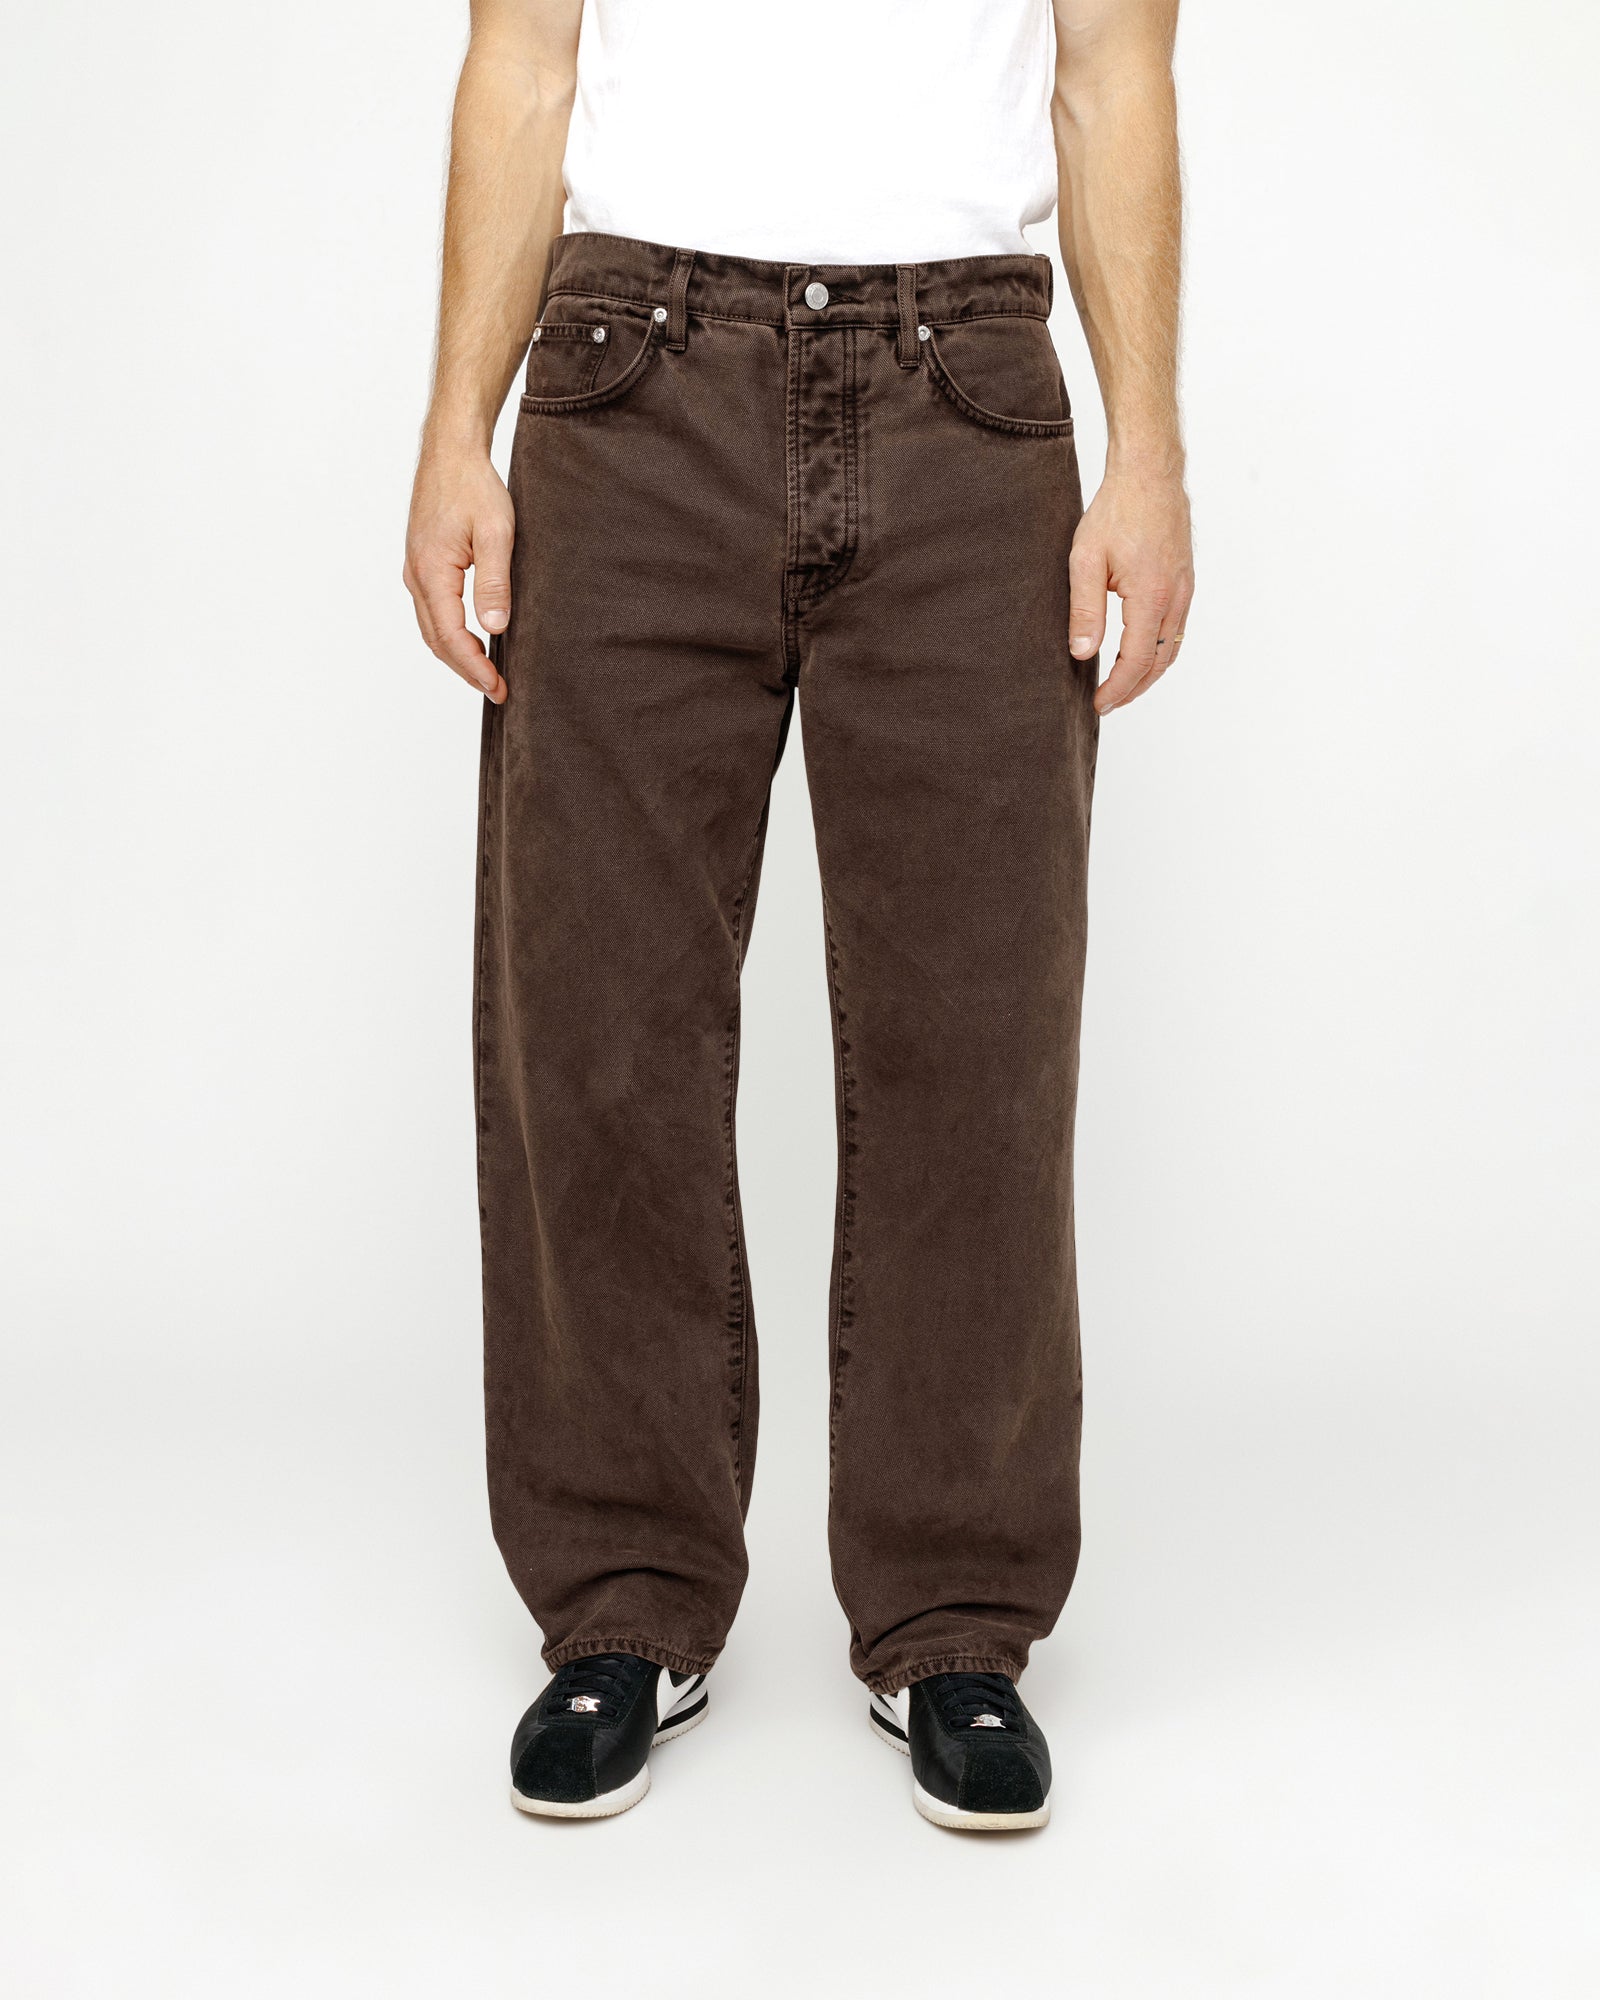 Classic Jean Washed Canvas in brown – Stüssy Europe